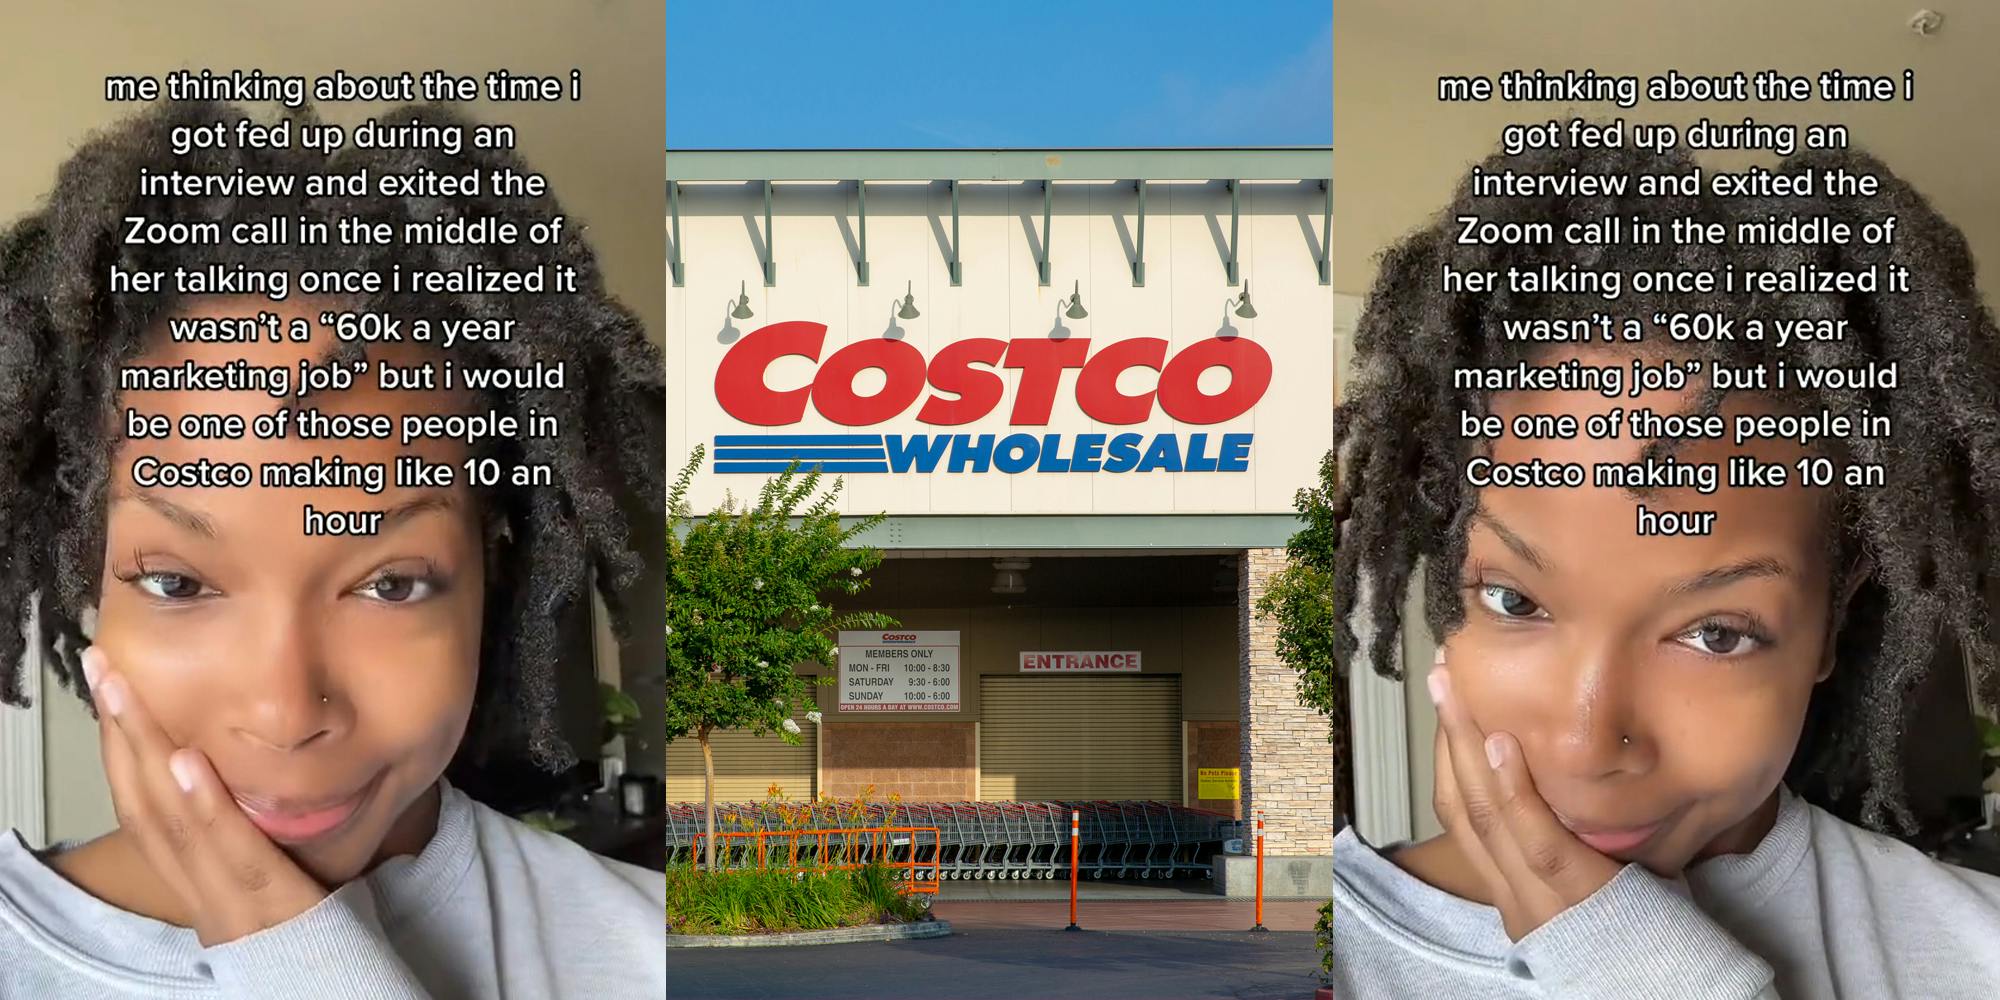 job hunter with caption "me thinking about the time I got fed up during an interview and excited the Zoom call in the middle of her talking once I realized it wasn't a "60k a year marketing job" but I would be one of those people in Costco making like 10 an hour" (l) Costco building entrance with sign (c) job hunter with caption "me thinking about the time I got fed up during an interview and excited the Zoom call in the middle of her talking once I realized it wasn't a "60k a year marketing job" but I would be one of those people in Costco making like 10 an hour" (r)